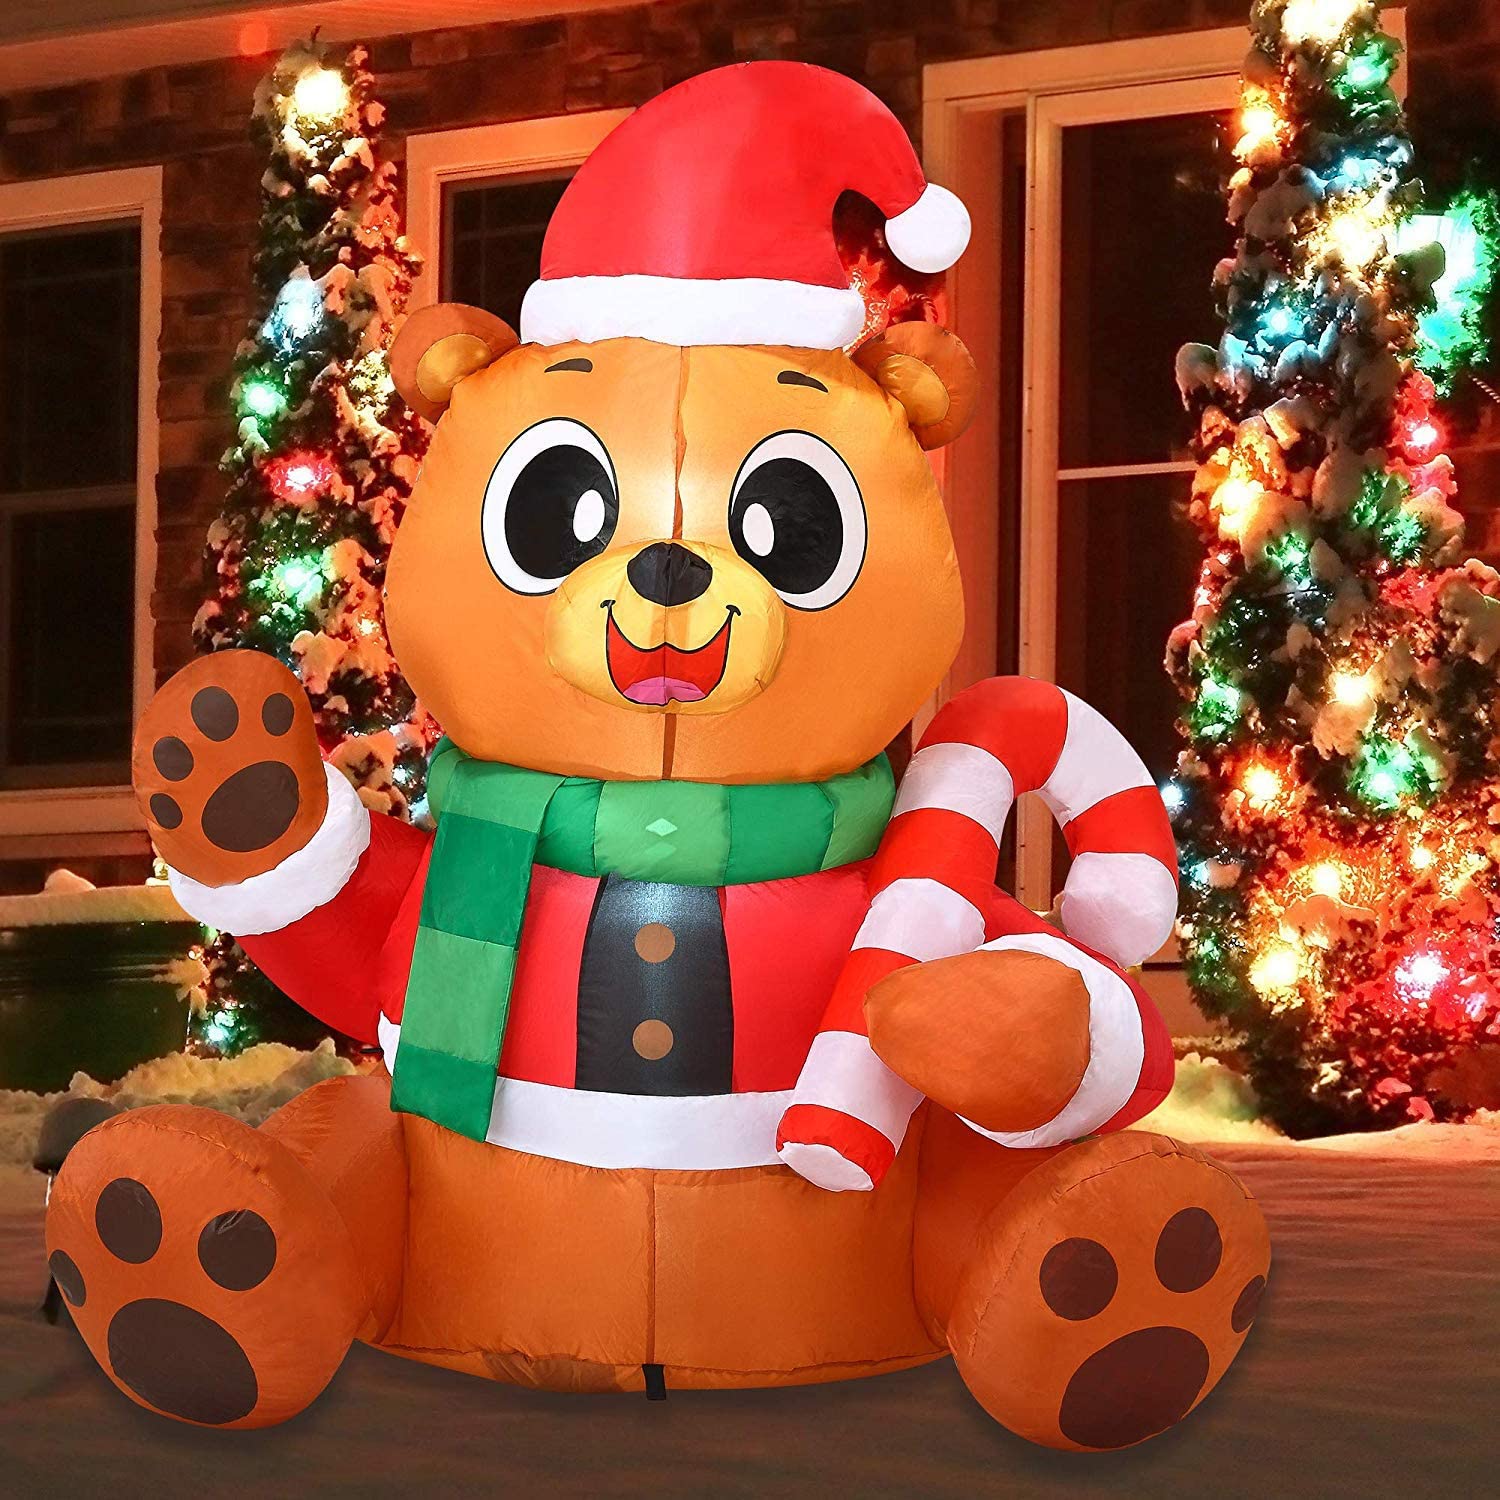 Joiedomi 4-ft Lighted Teddy Bear Christmas Inflatable at Lowes.com